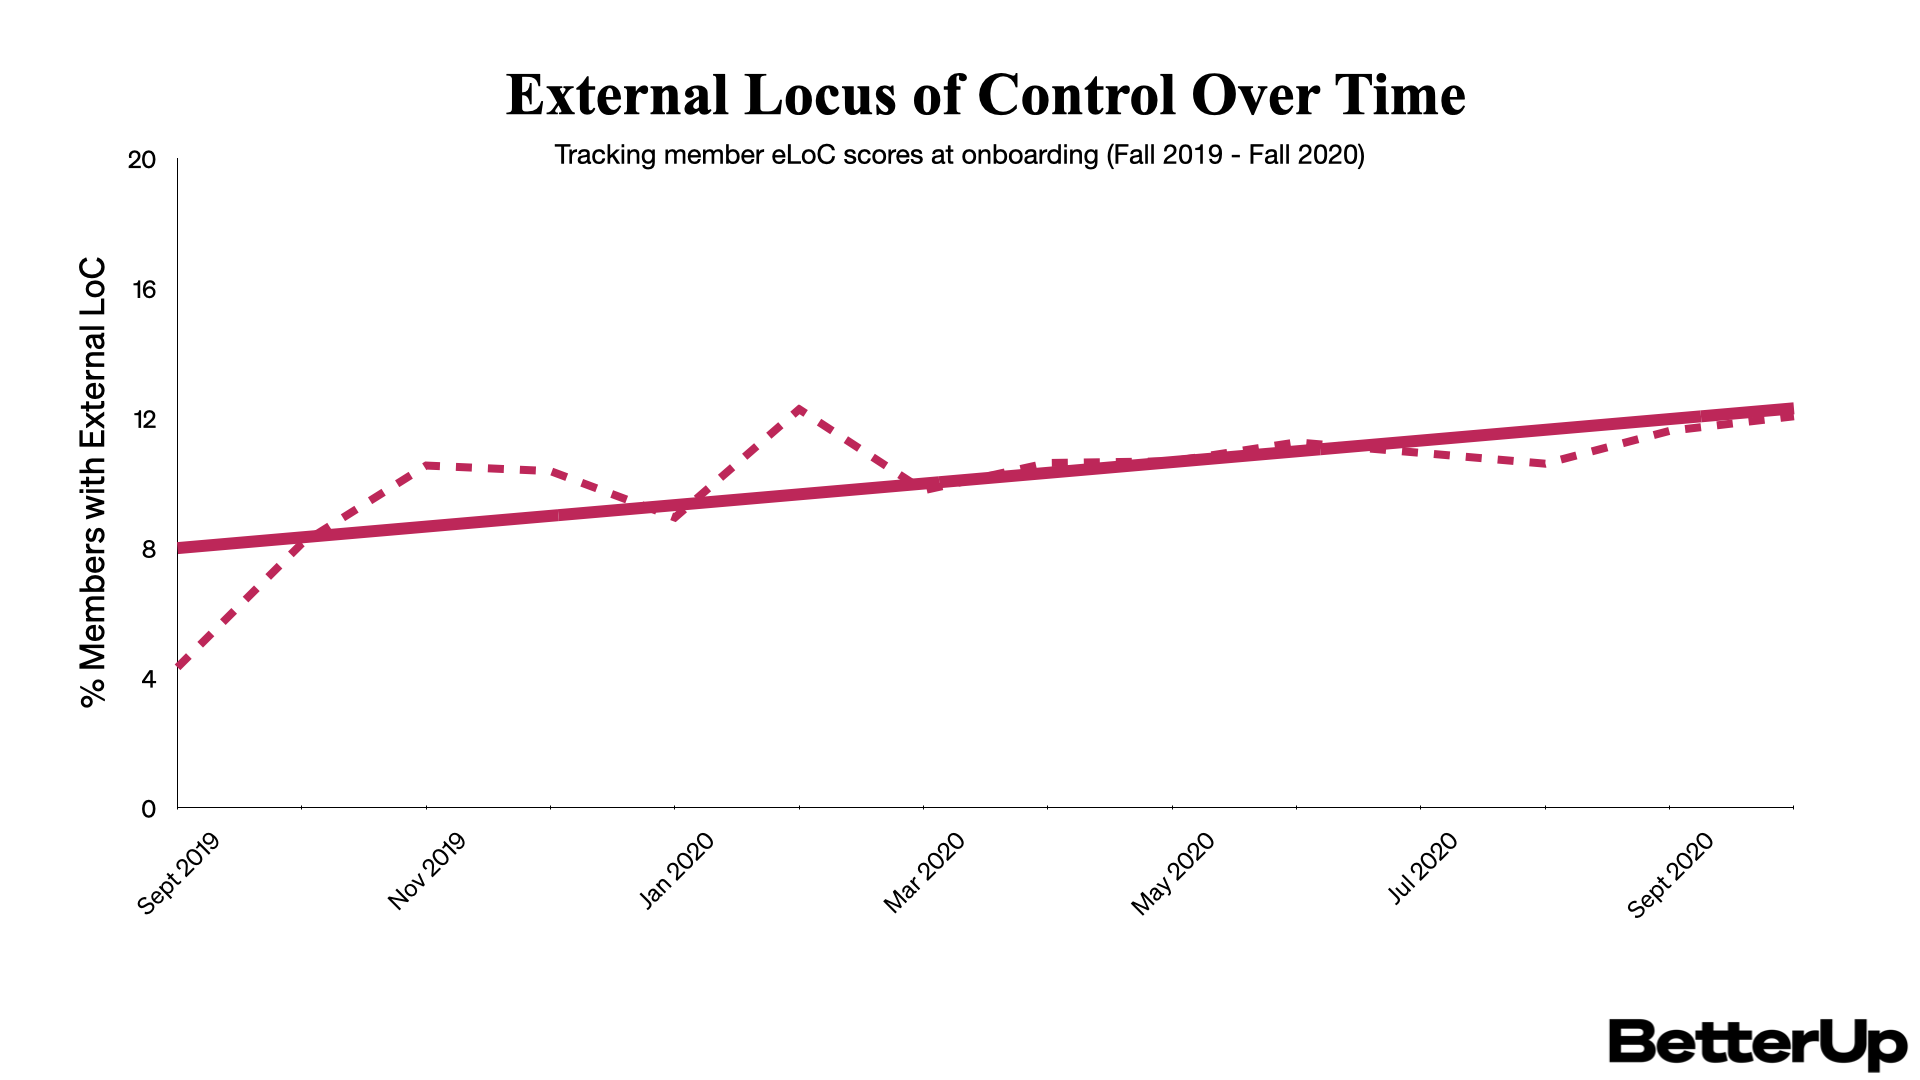 graph showing external locus of control time during onboarding increase from fall 2019 to fall 2020